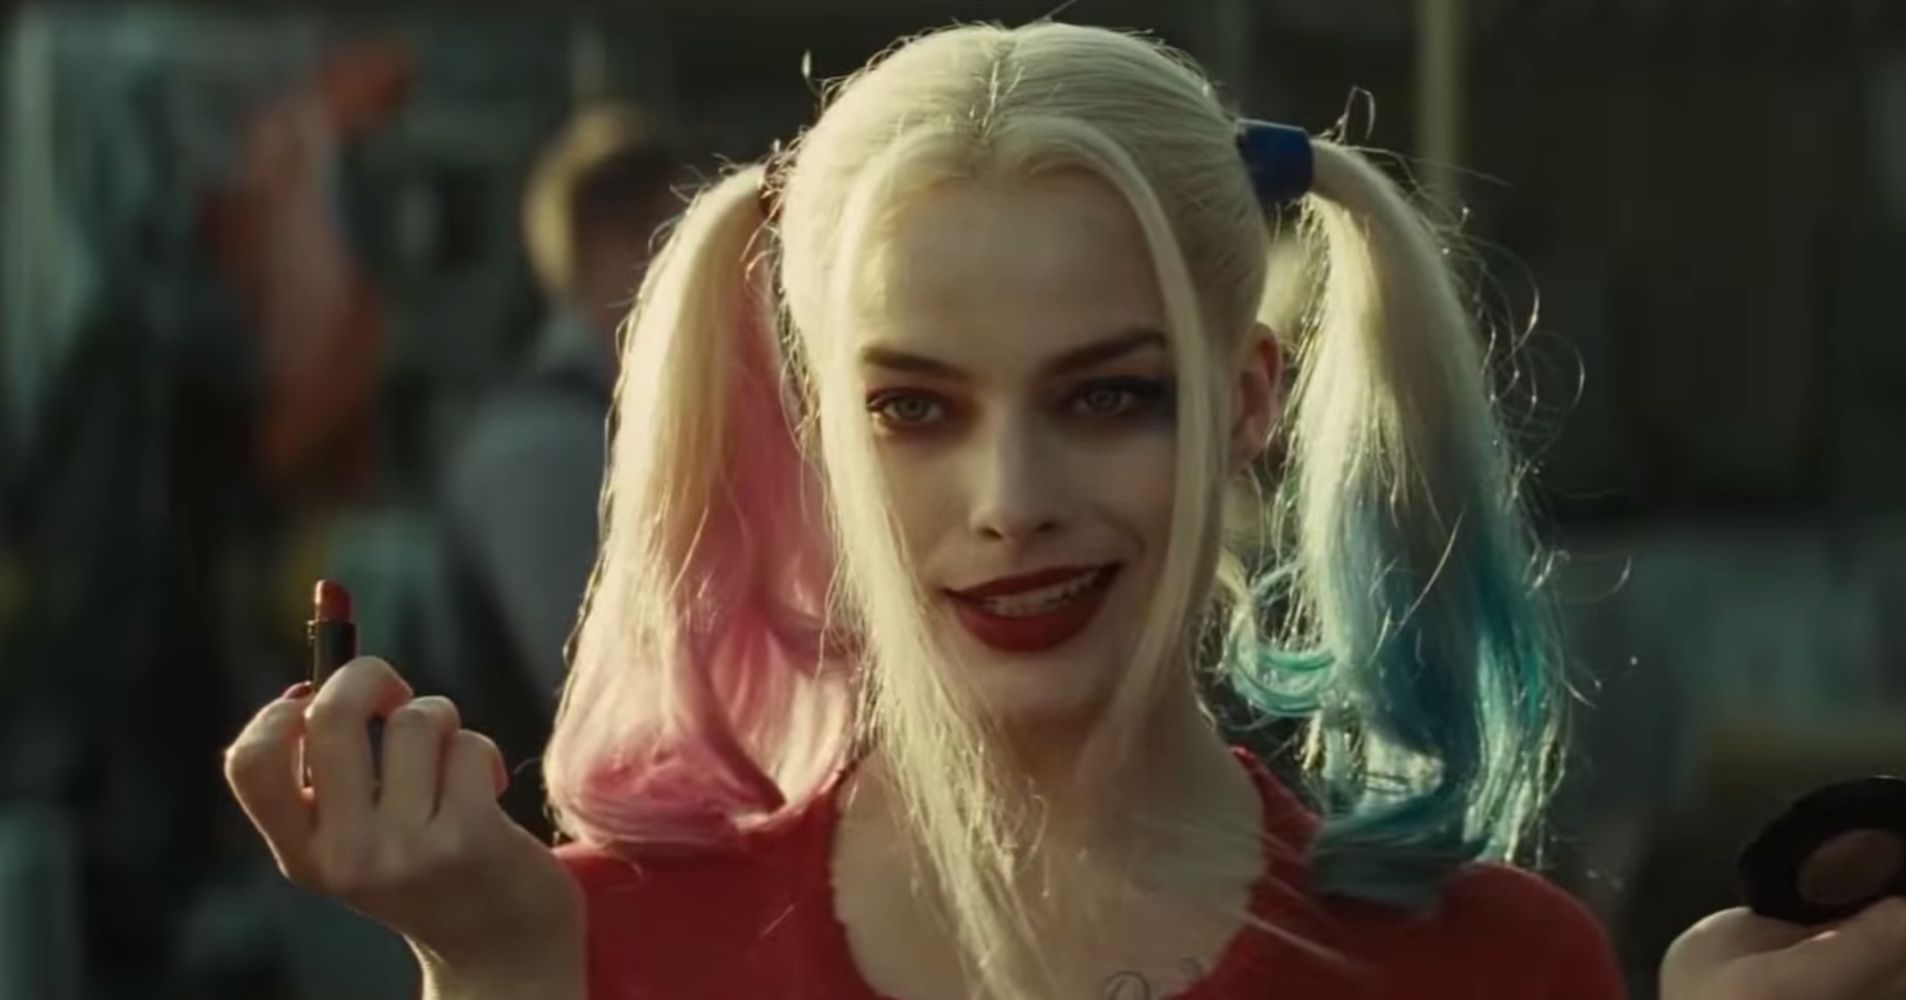 Margot Robbie Reveals Why She Thinks Her Scenes With The Joker Were Cut From Suicide Squad